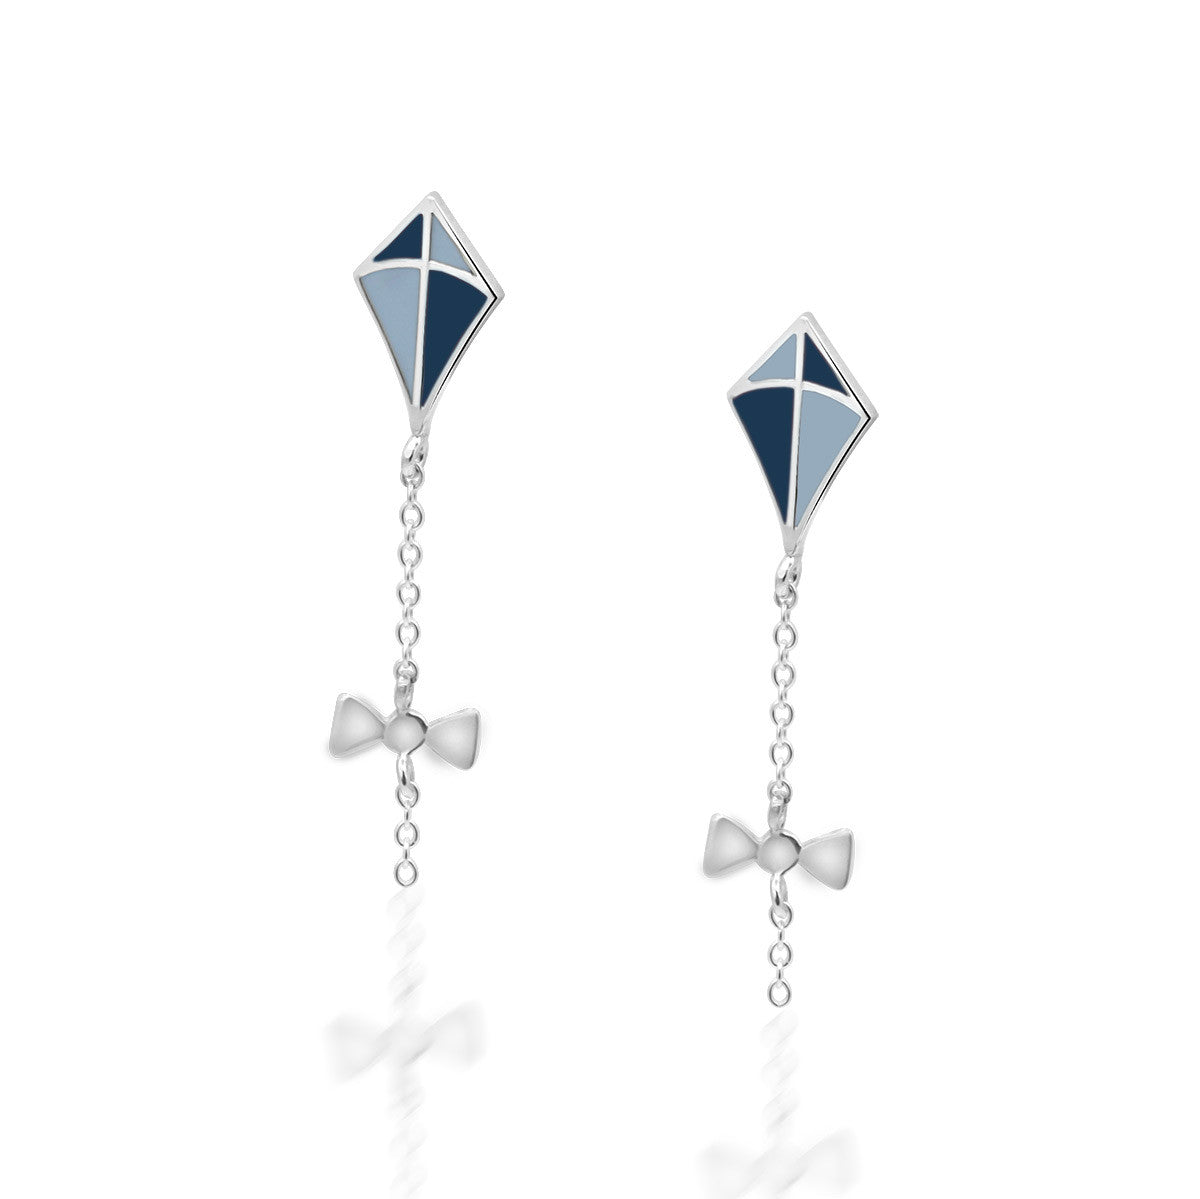 Silver kite earrings pastel blue and navy